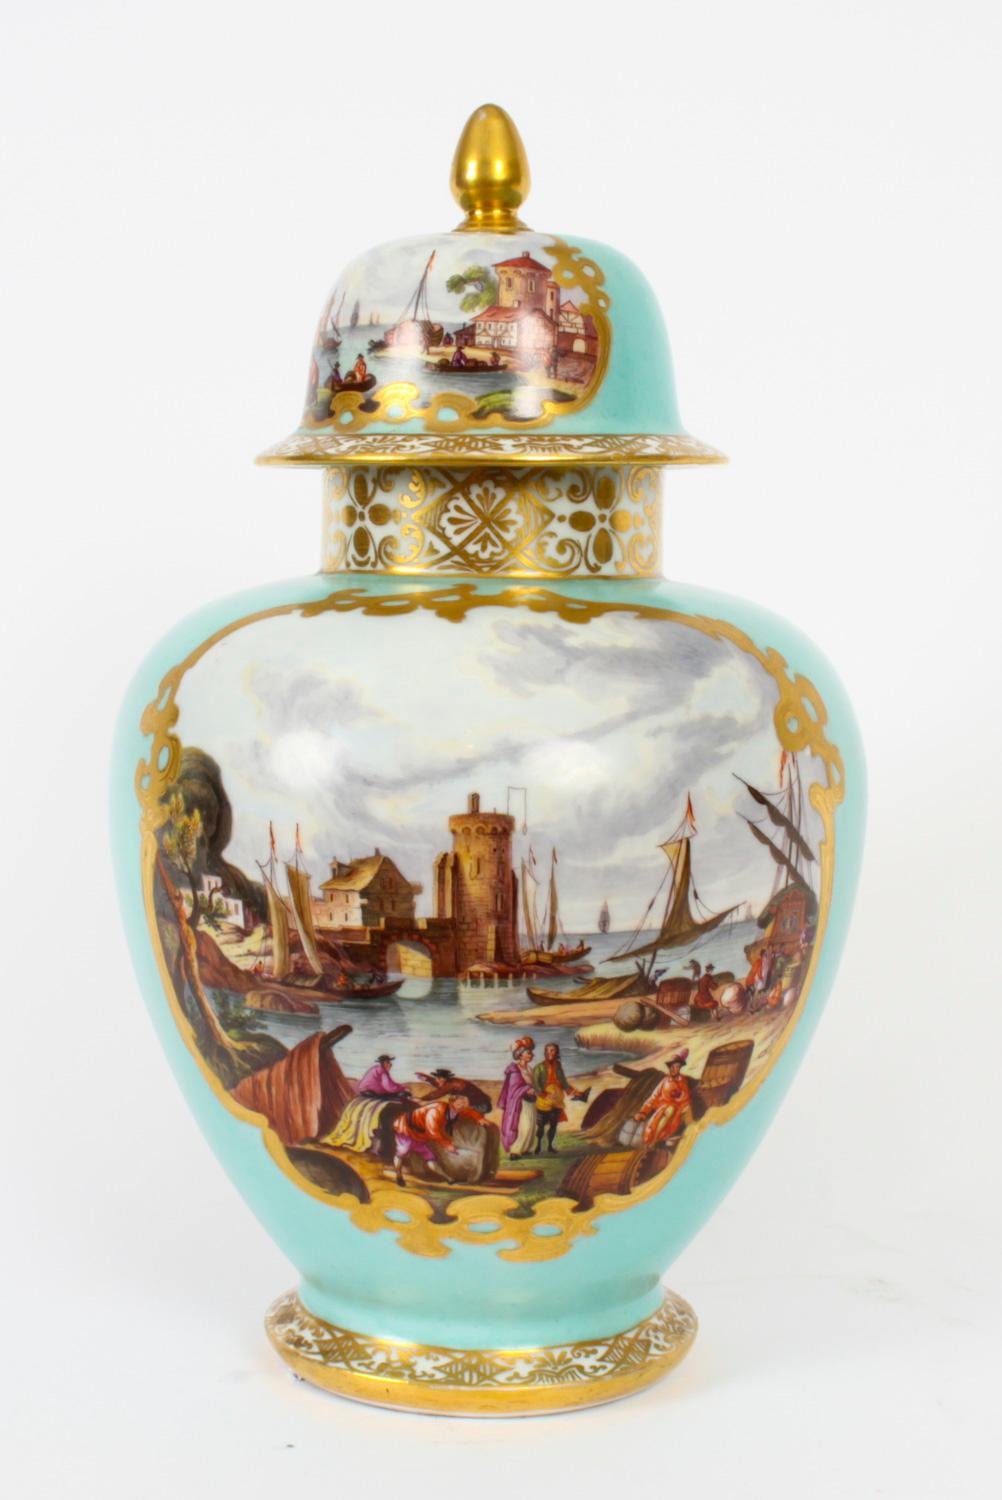 This is a beautiful antique pair of Helena Wolfsohn Dresden porcelain vases and covers, circa 1850 in date.

Each ovoid shaped vase features painted panels of figures in Kauffahrtei scenes on a sea green ground highlighted in gilt. The bases